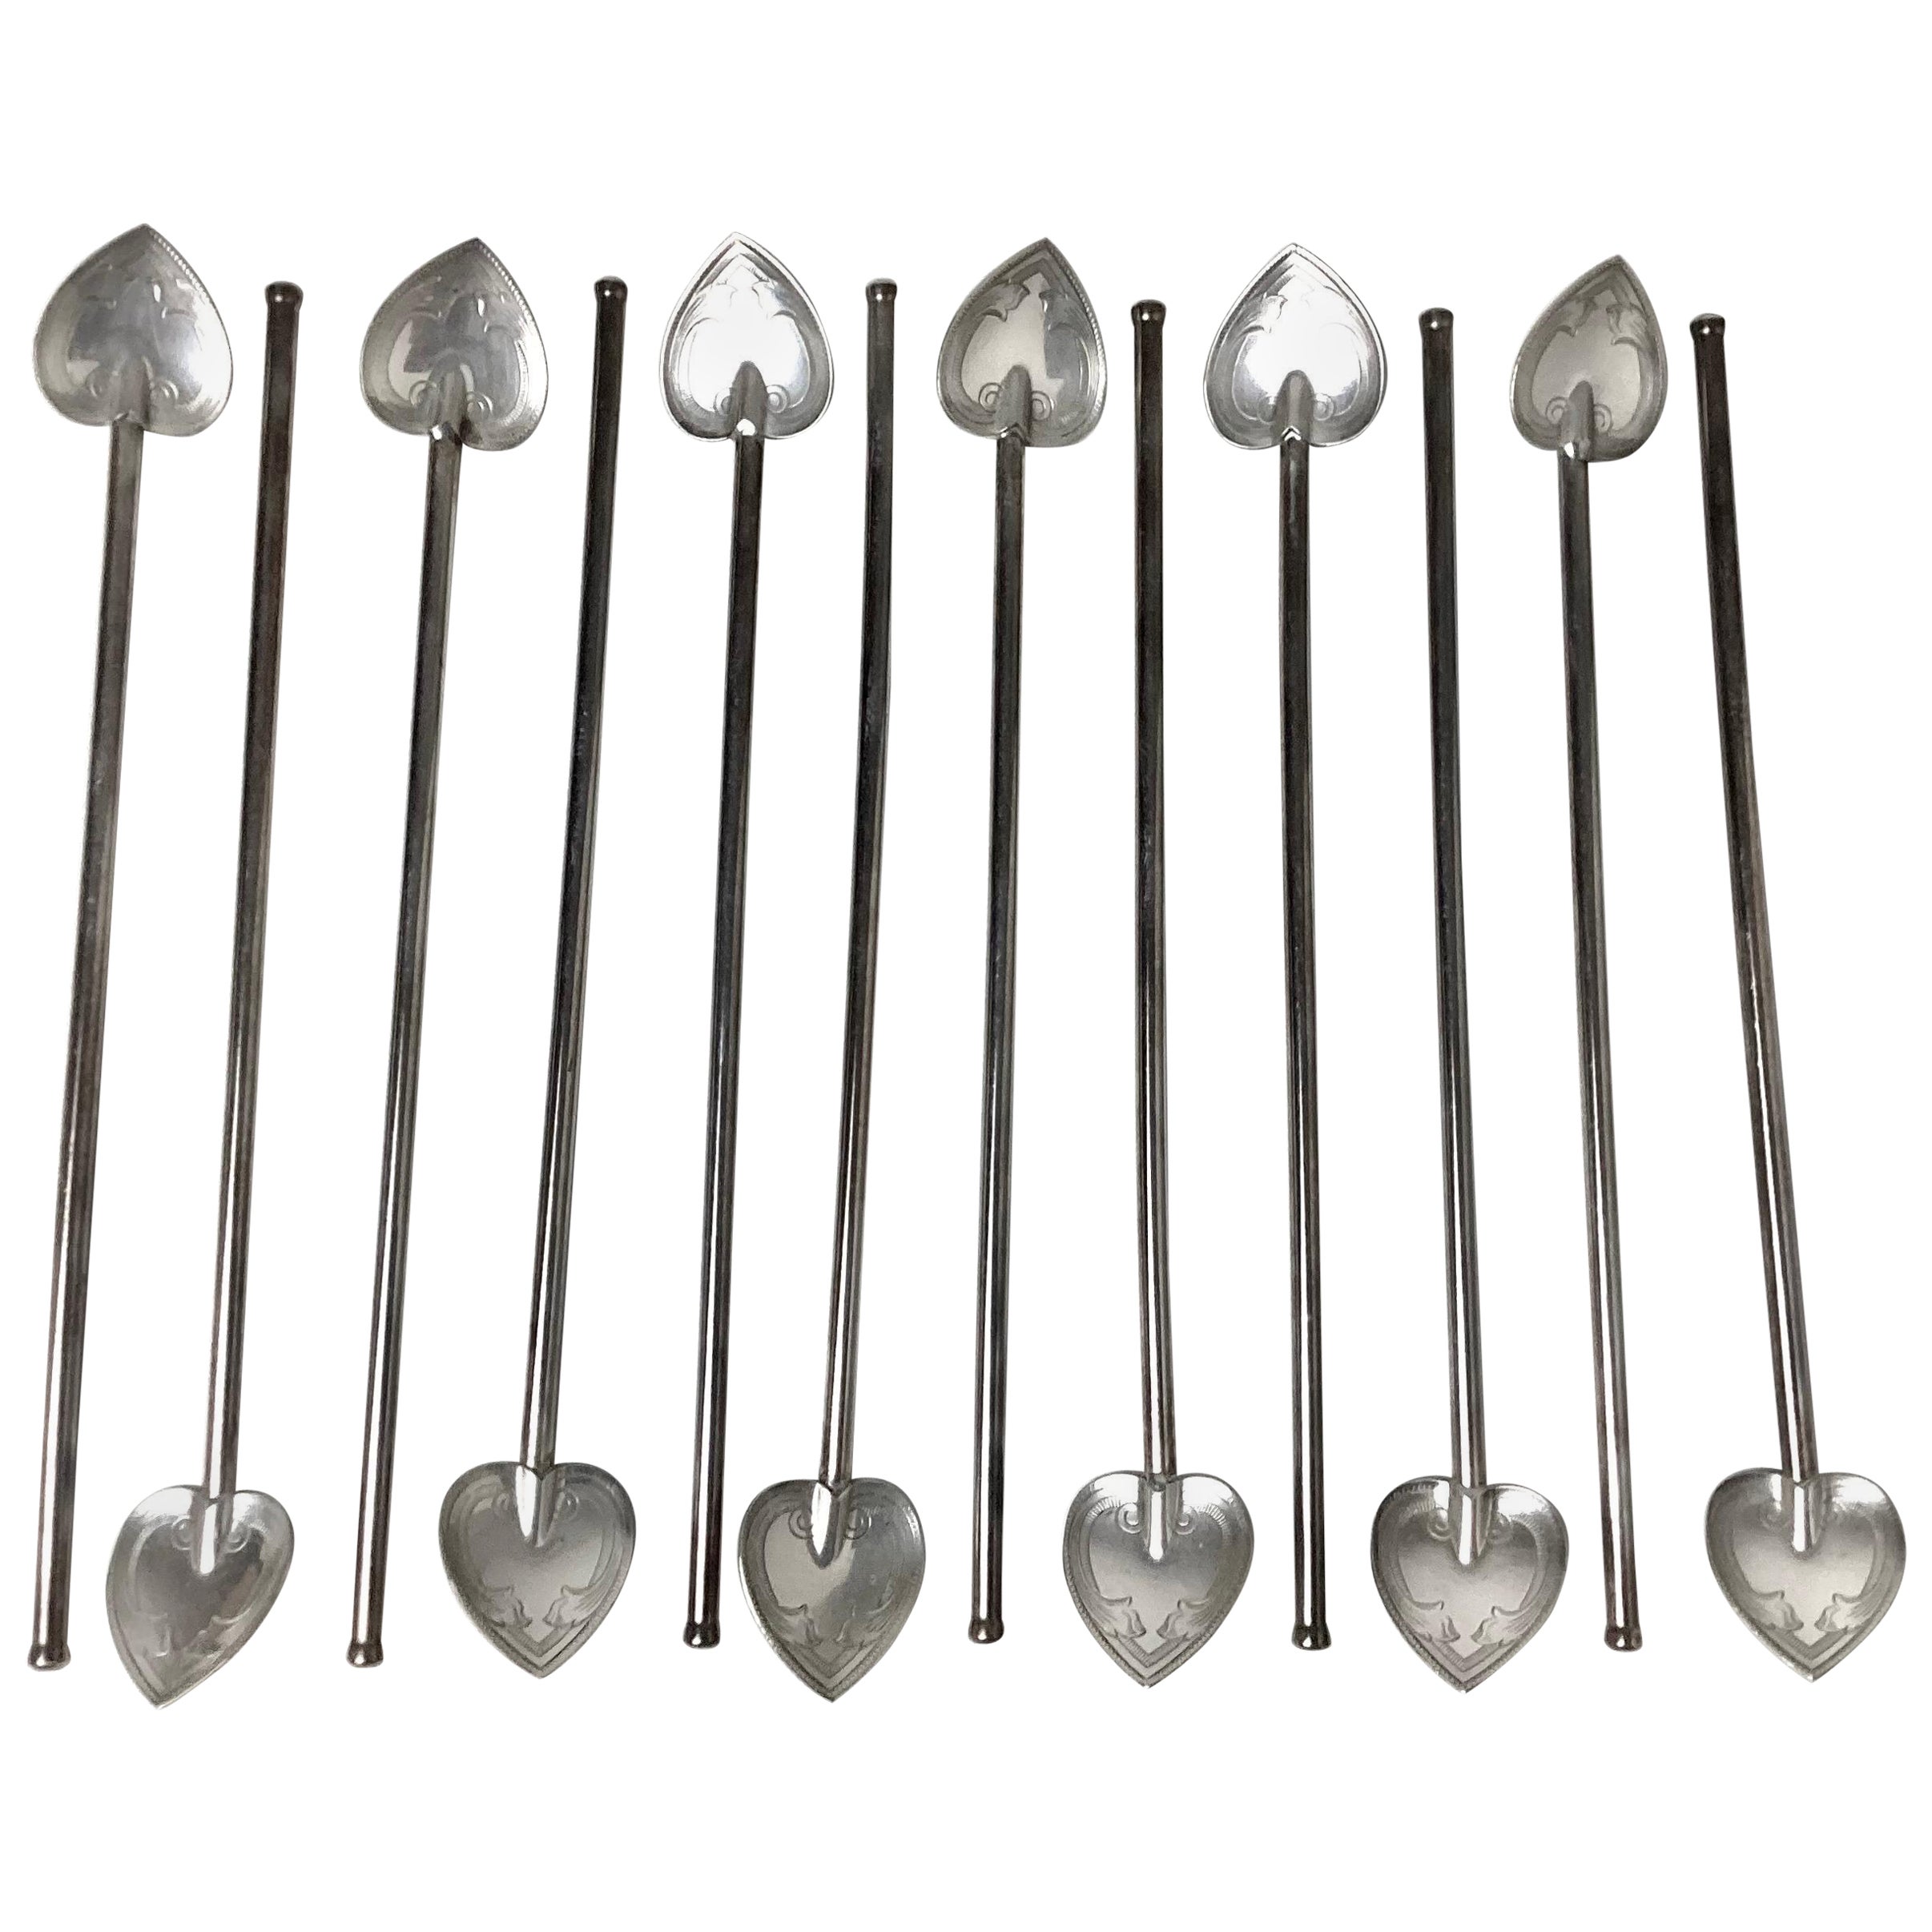 Set of 12 Sterling Silver Mint Julep Iced Tea Straws Spoons with Heart Bowls